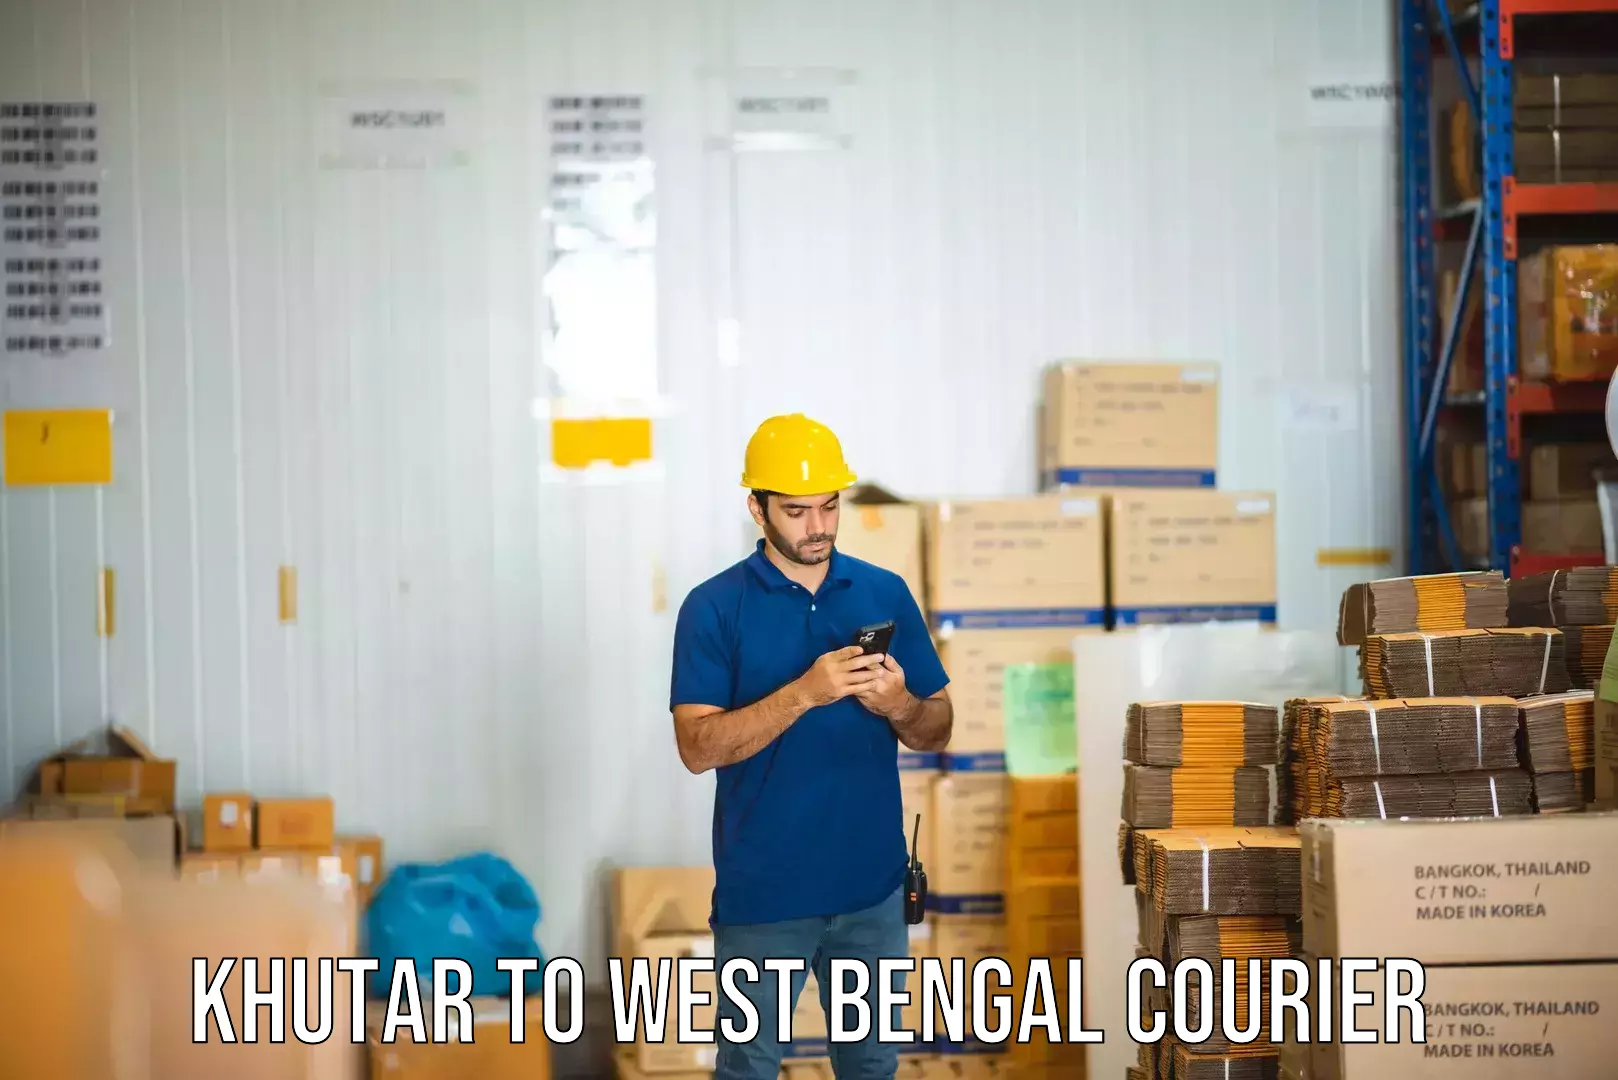 Reliable delivery network Khutar to West Bengal